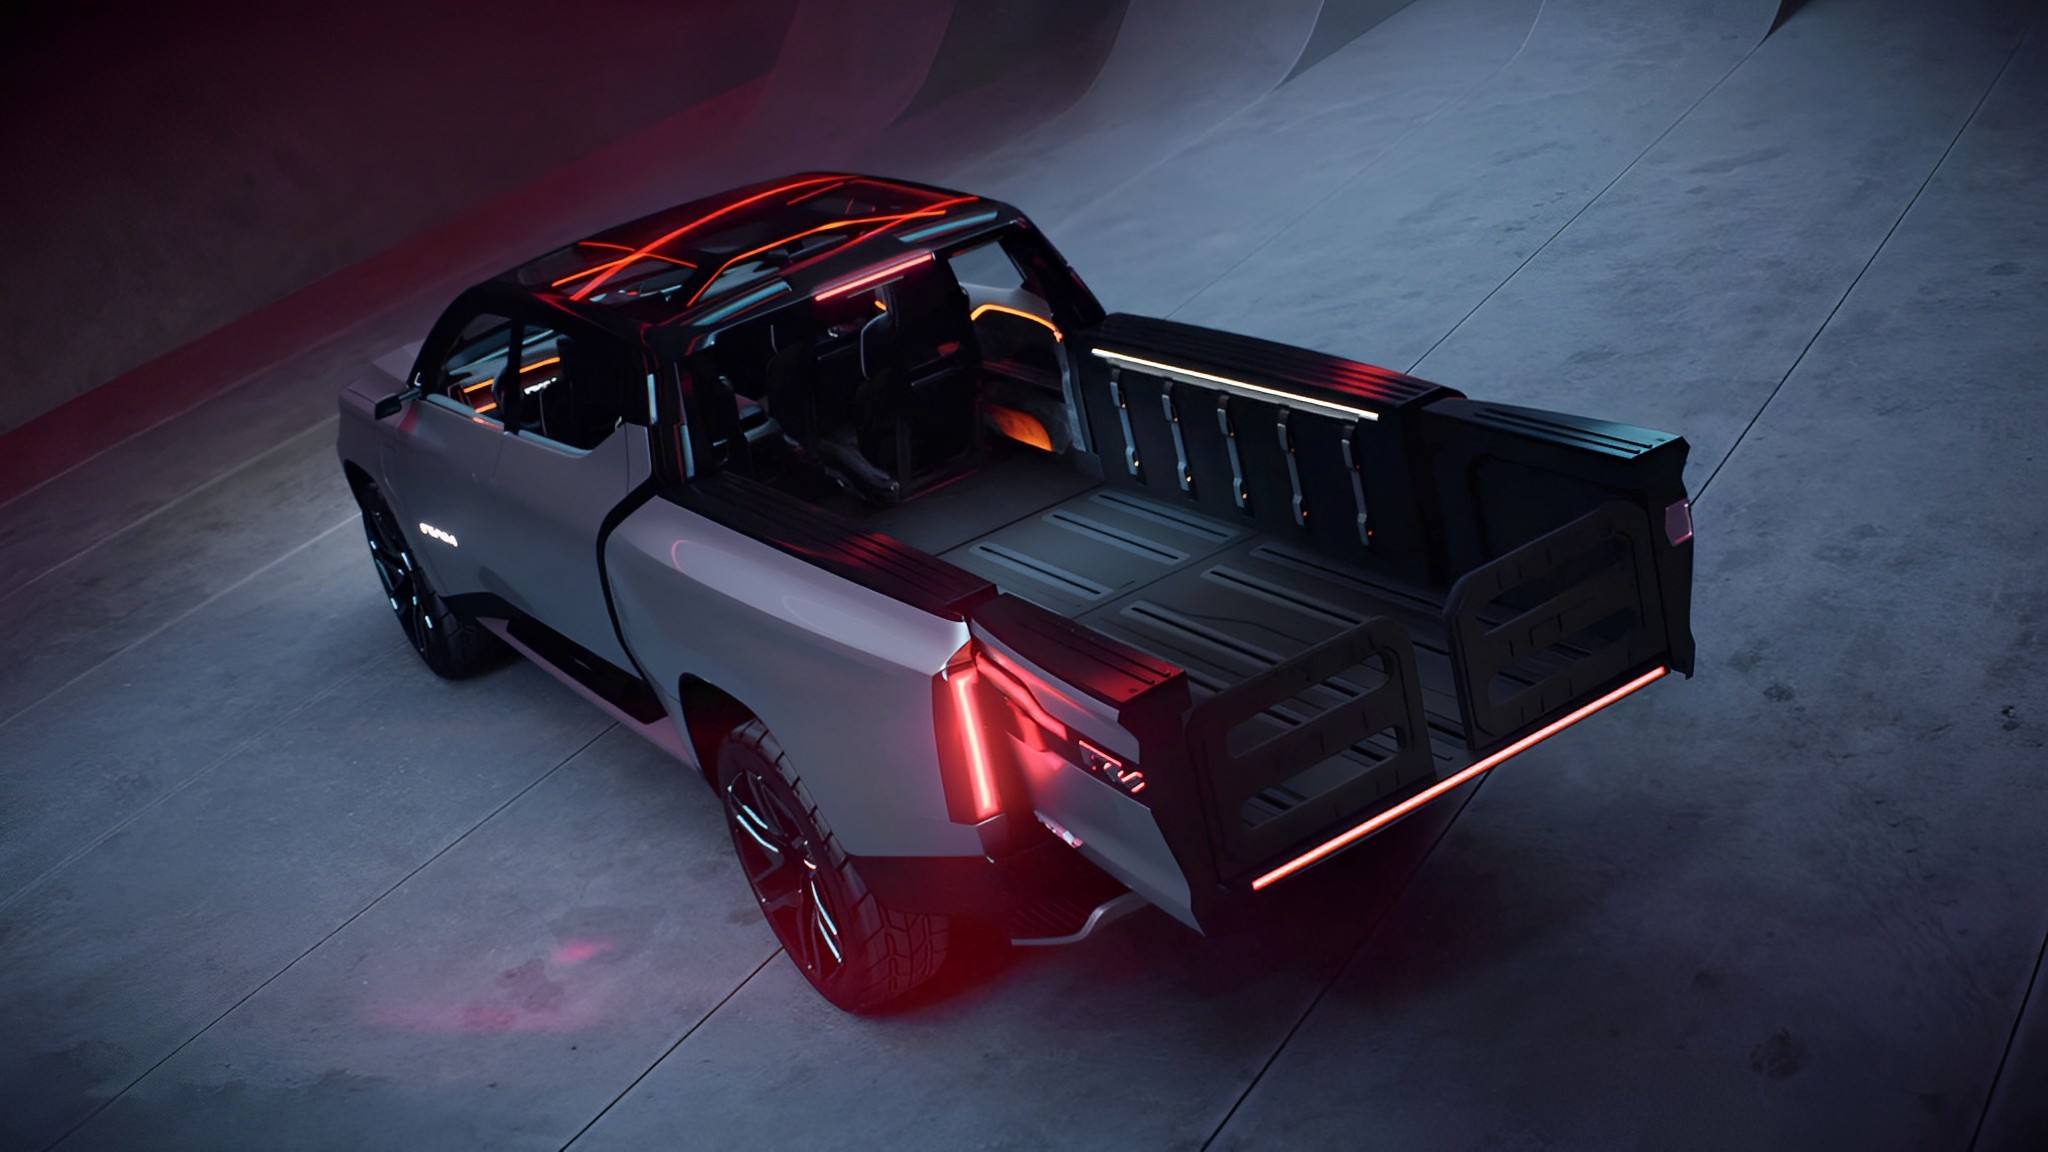 https://e-vehicleinfo.com/global/ram-1500-electric-pickup-truck-price-features-specifications/